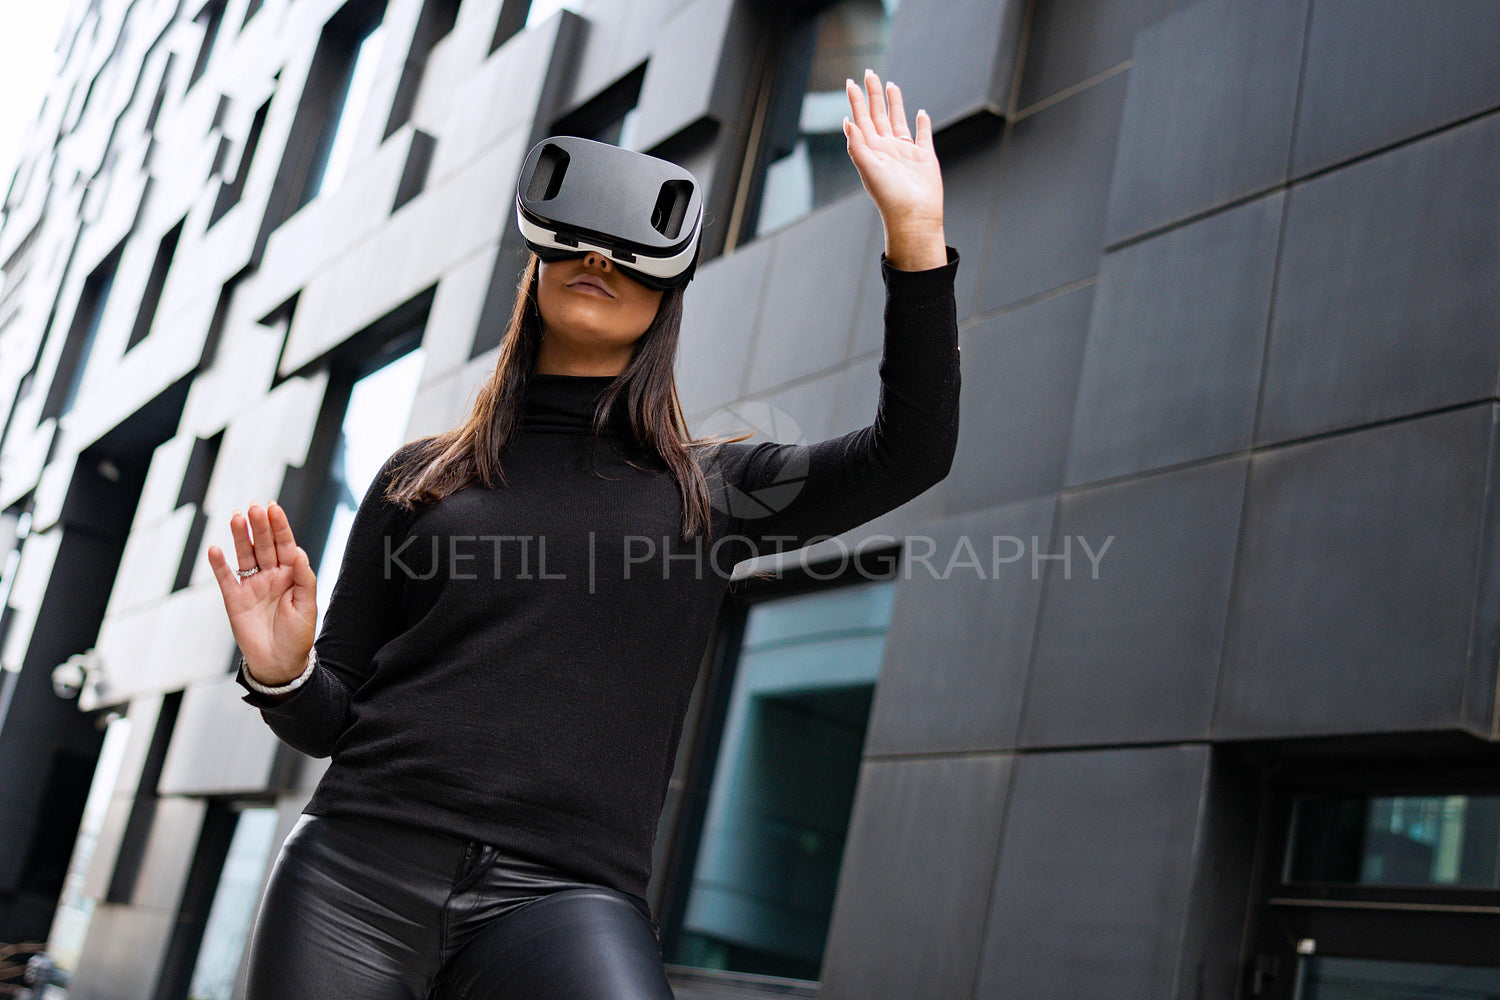 Woman Portrait Using Virtual Reality Glasses And Black Outfit In Futuristic City